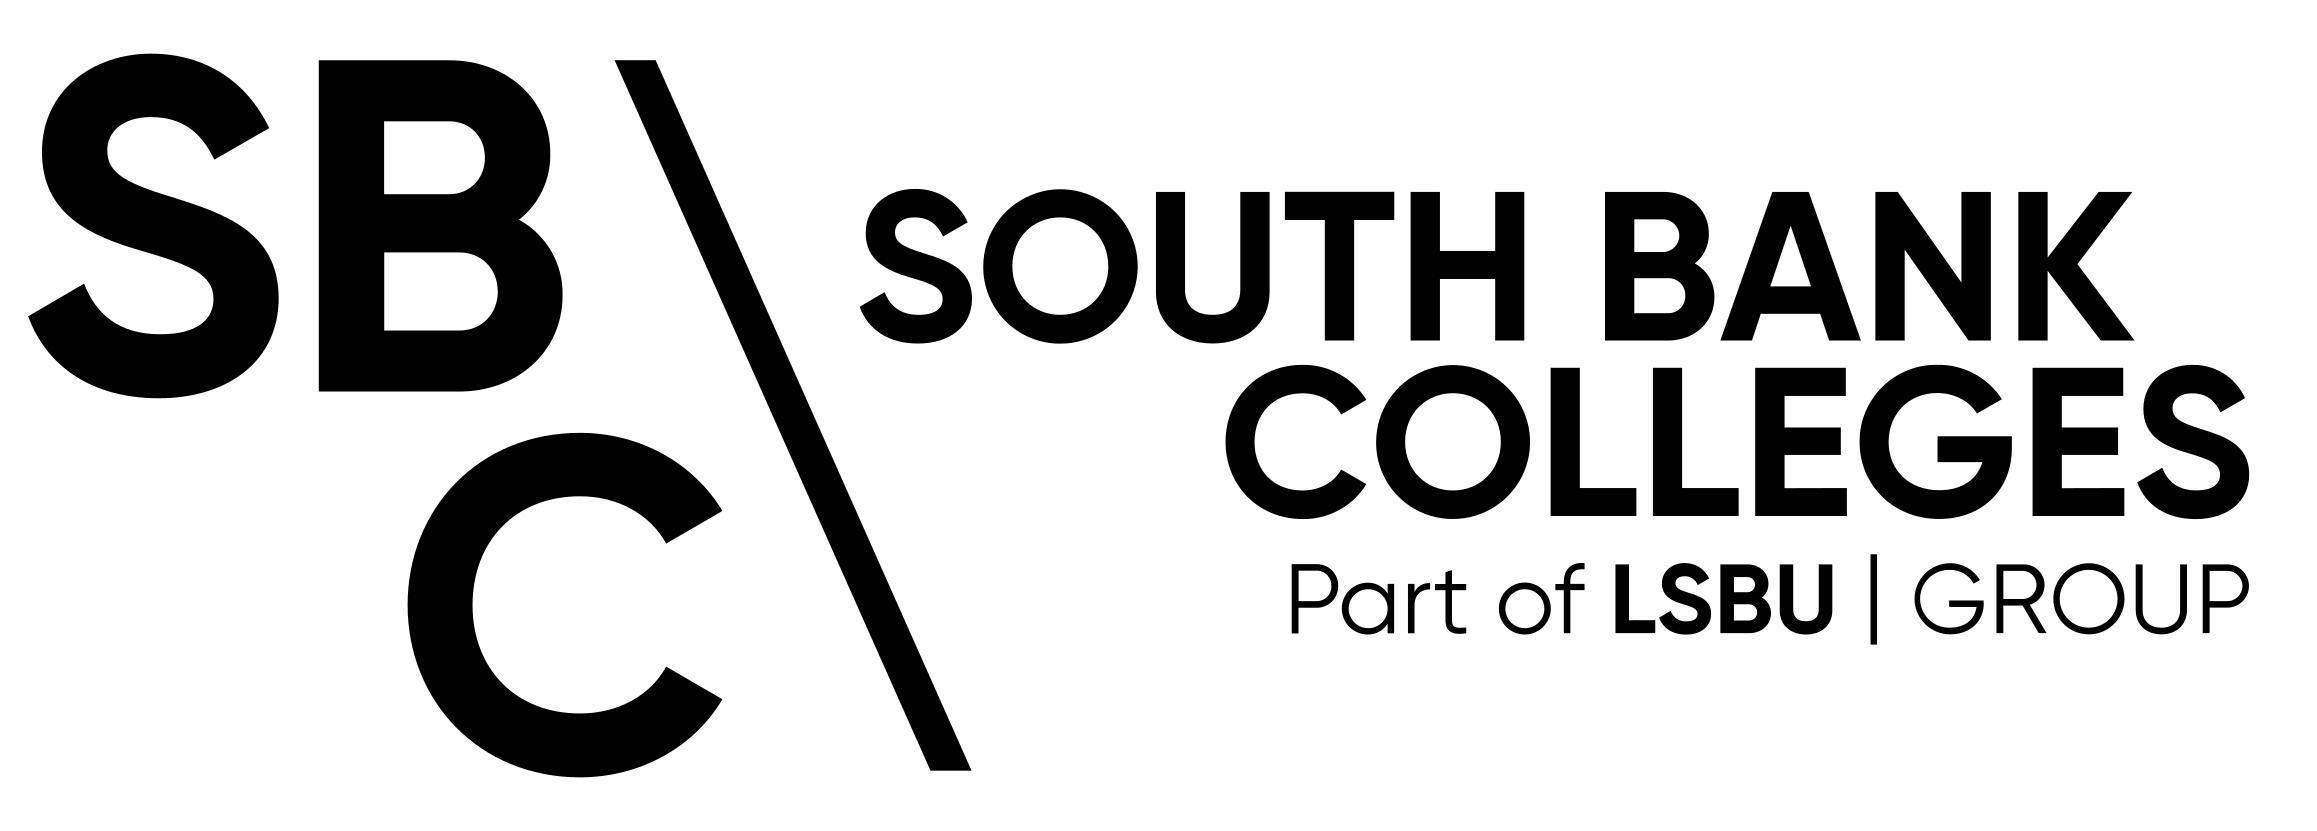 London South Bank Colleges logo